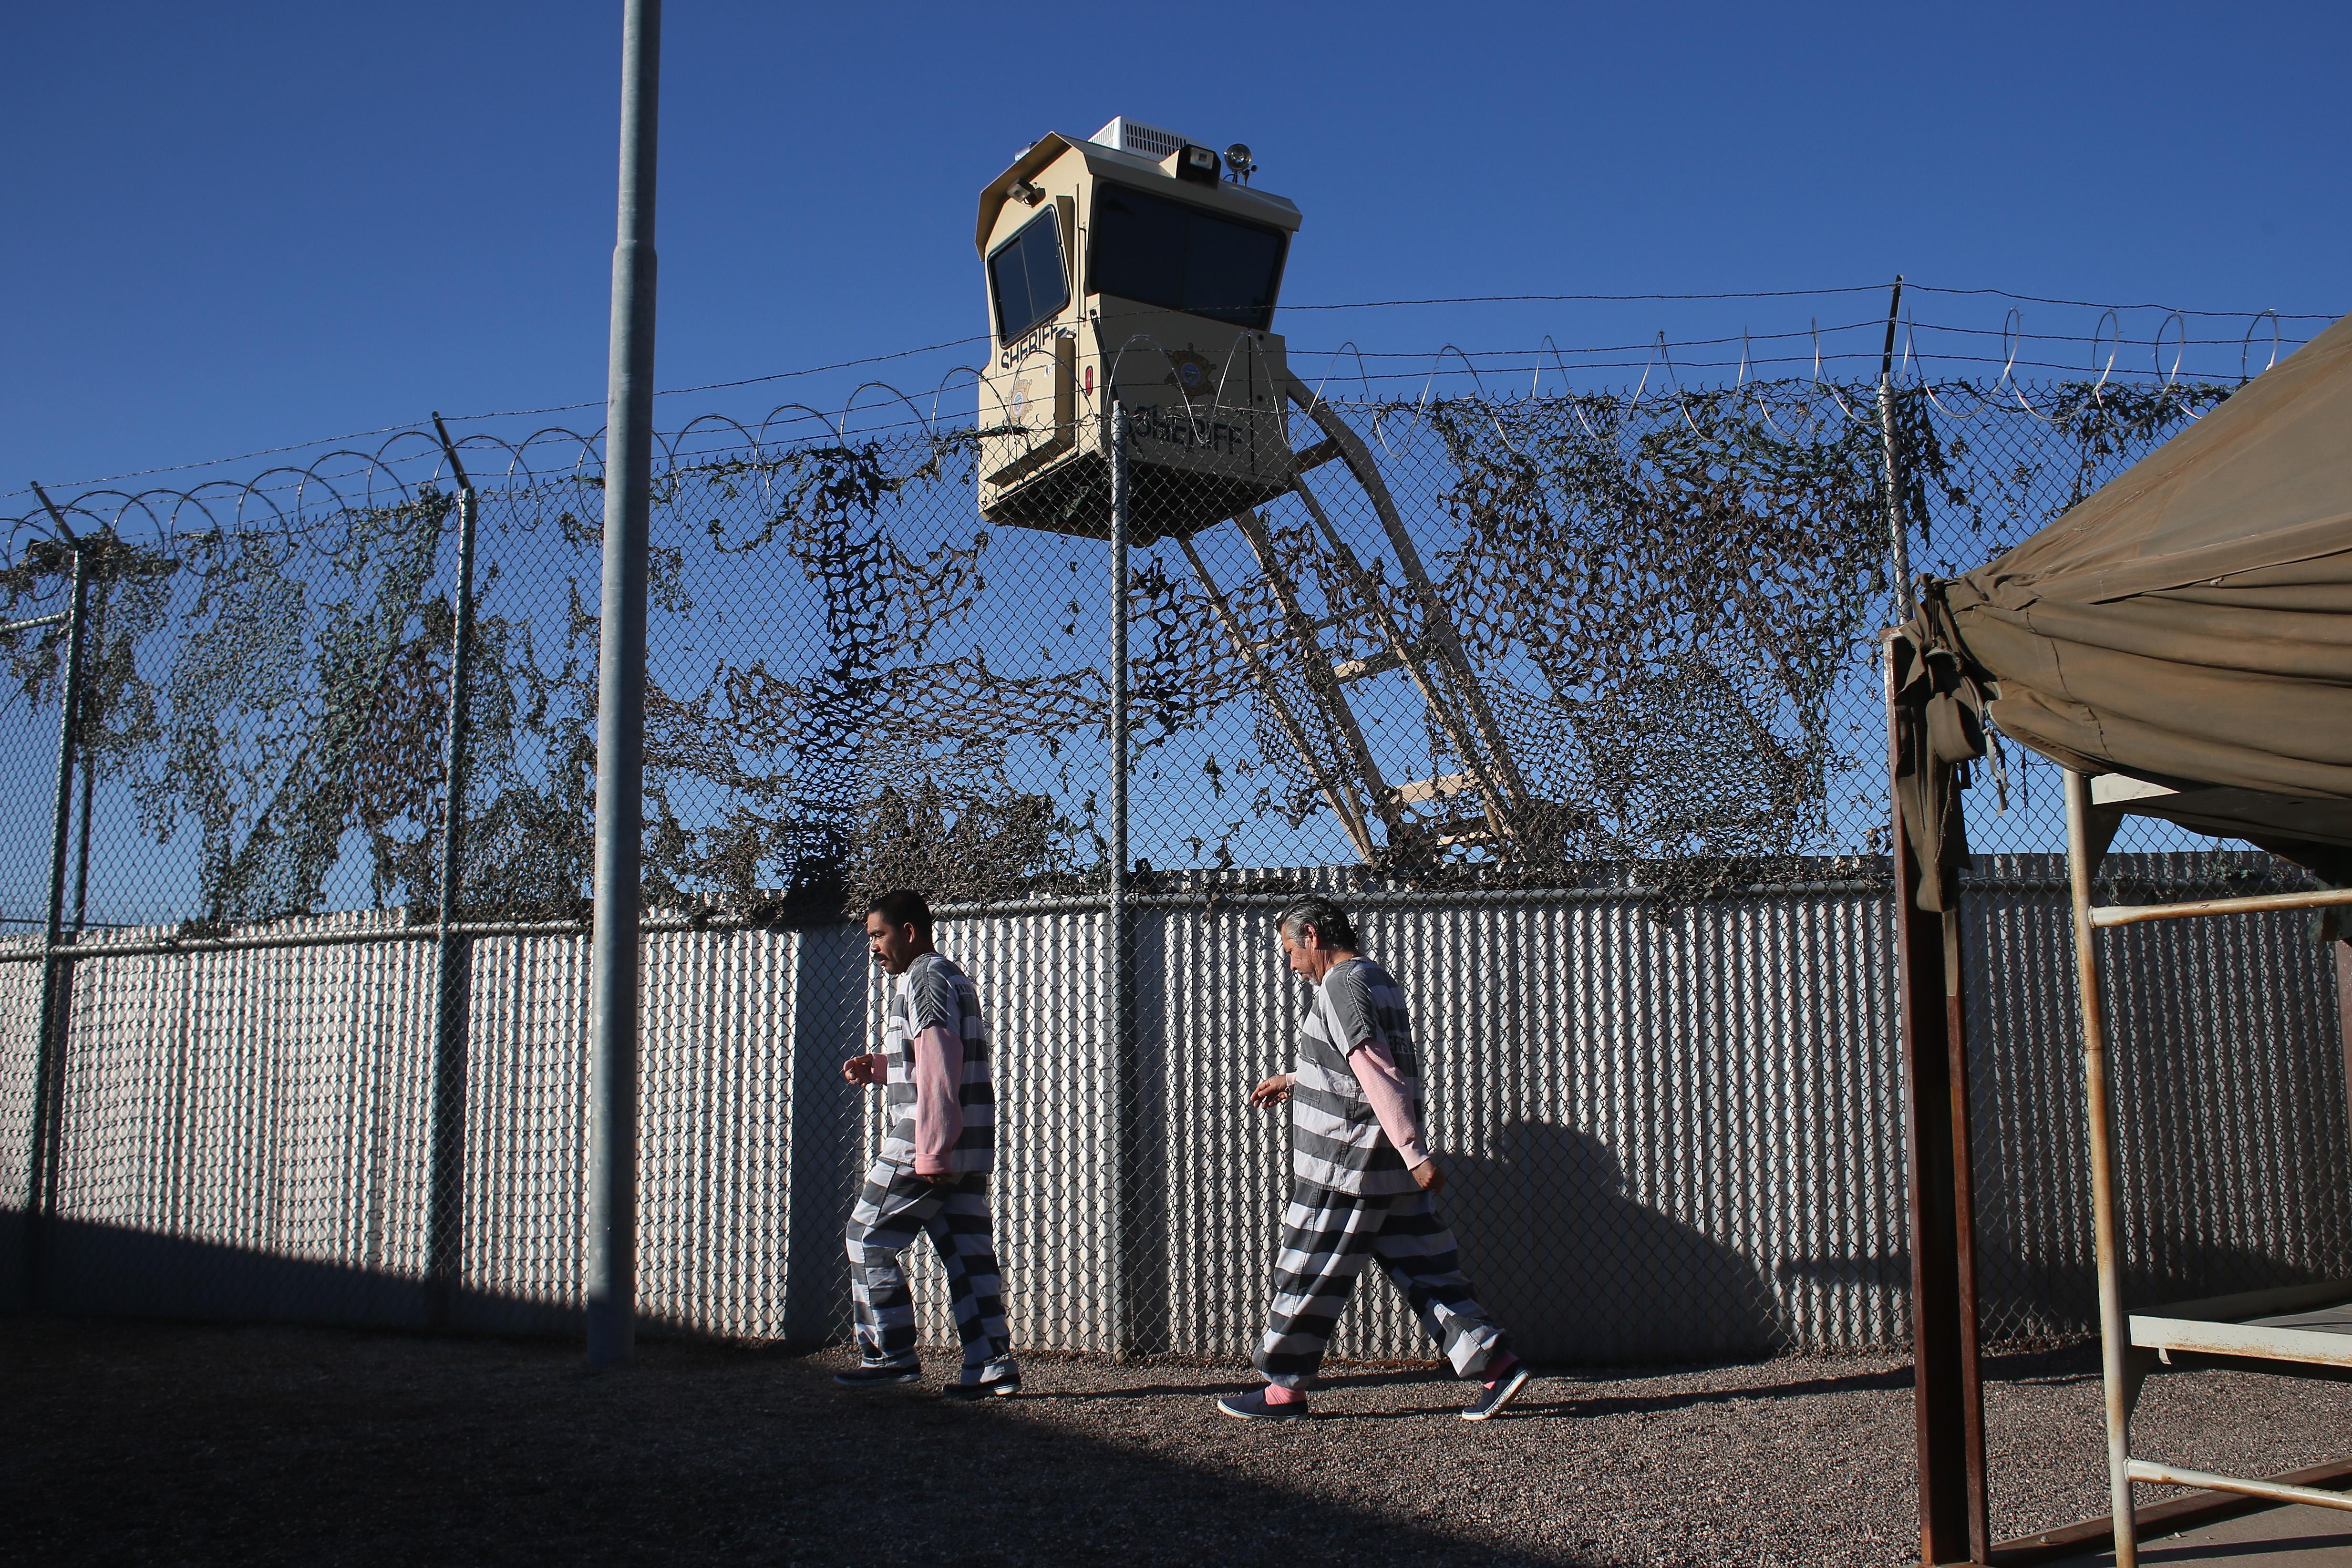 Inmates in striped uniforms walk outside a jail in Arizona